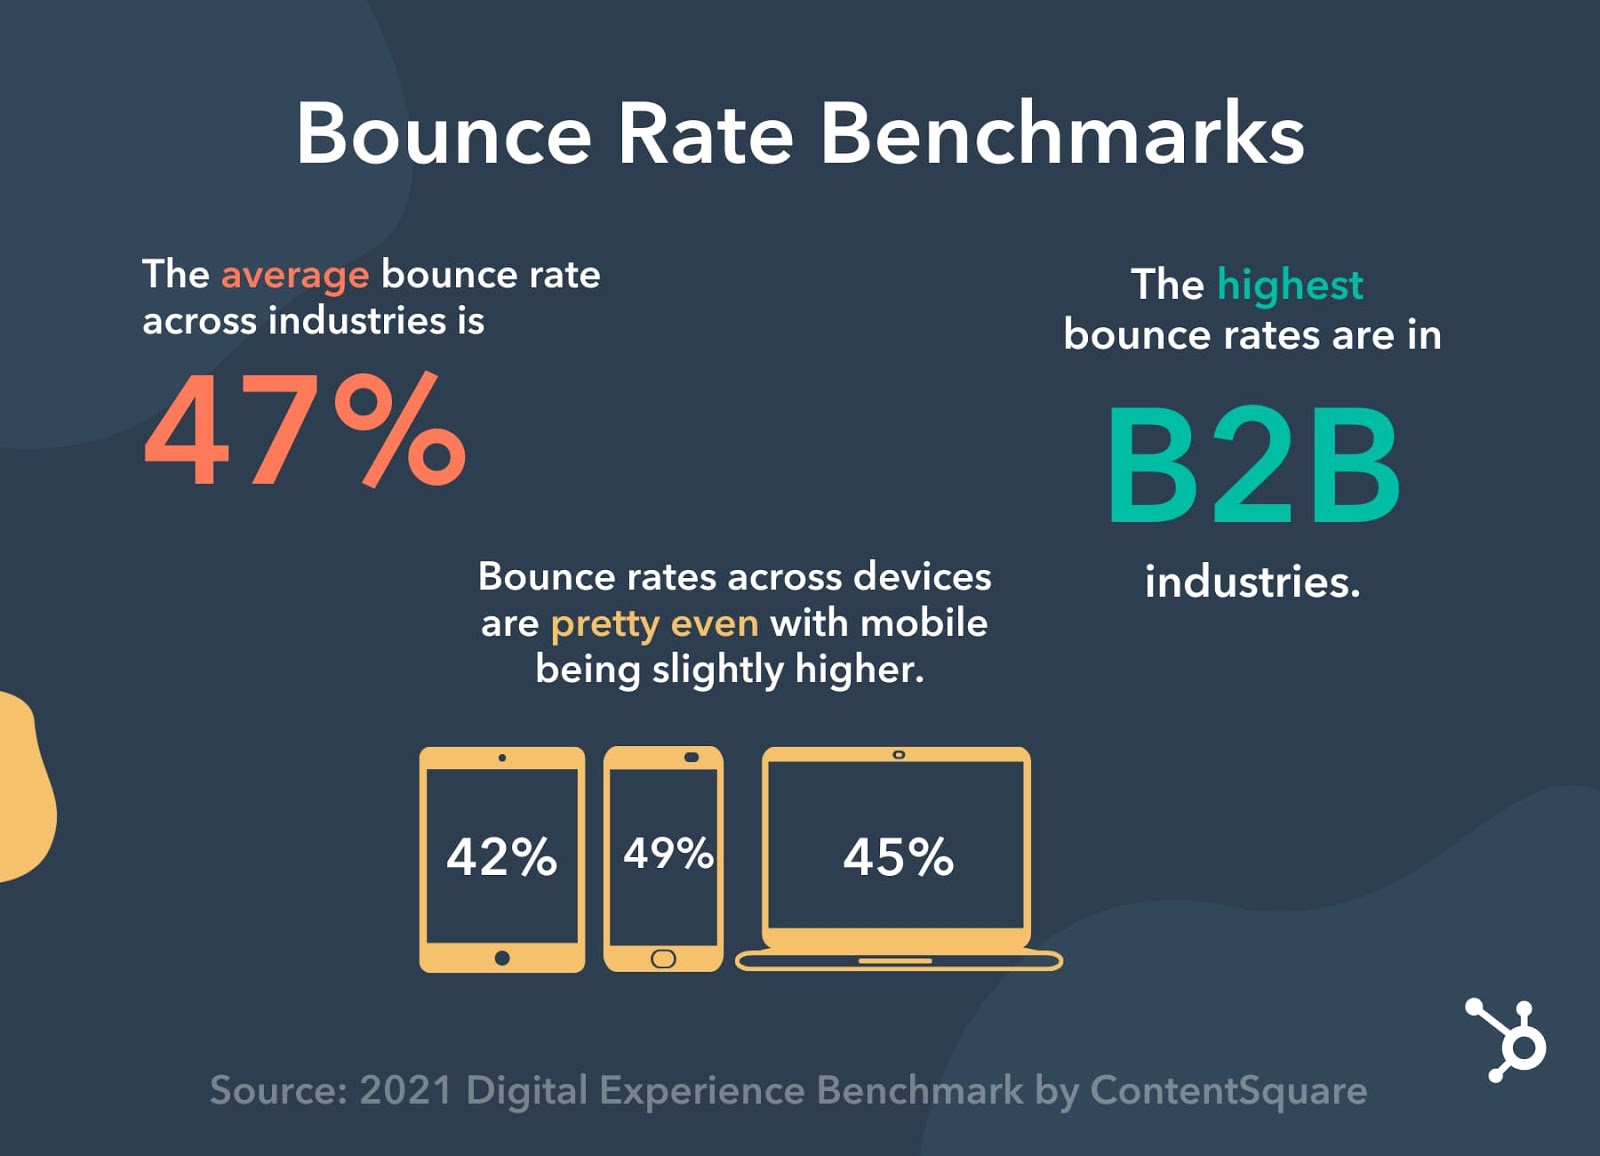 Bounce rate benchmarks